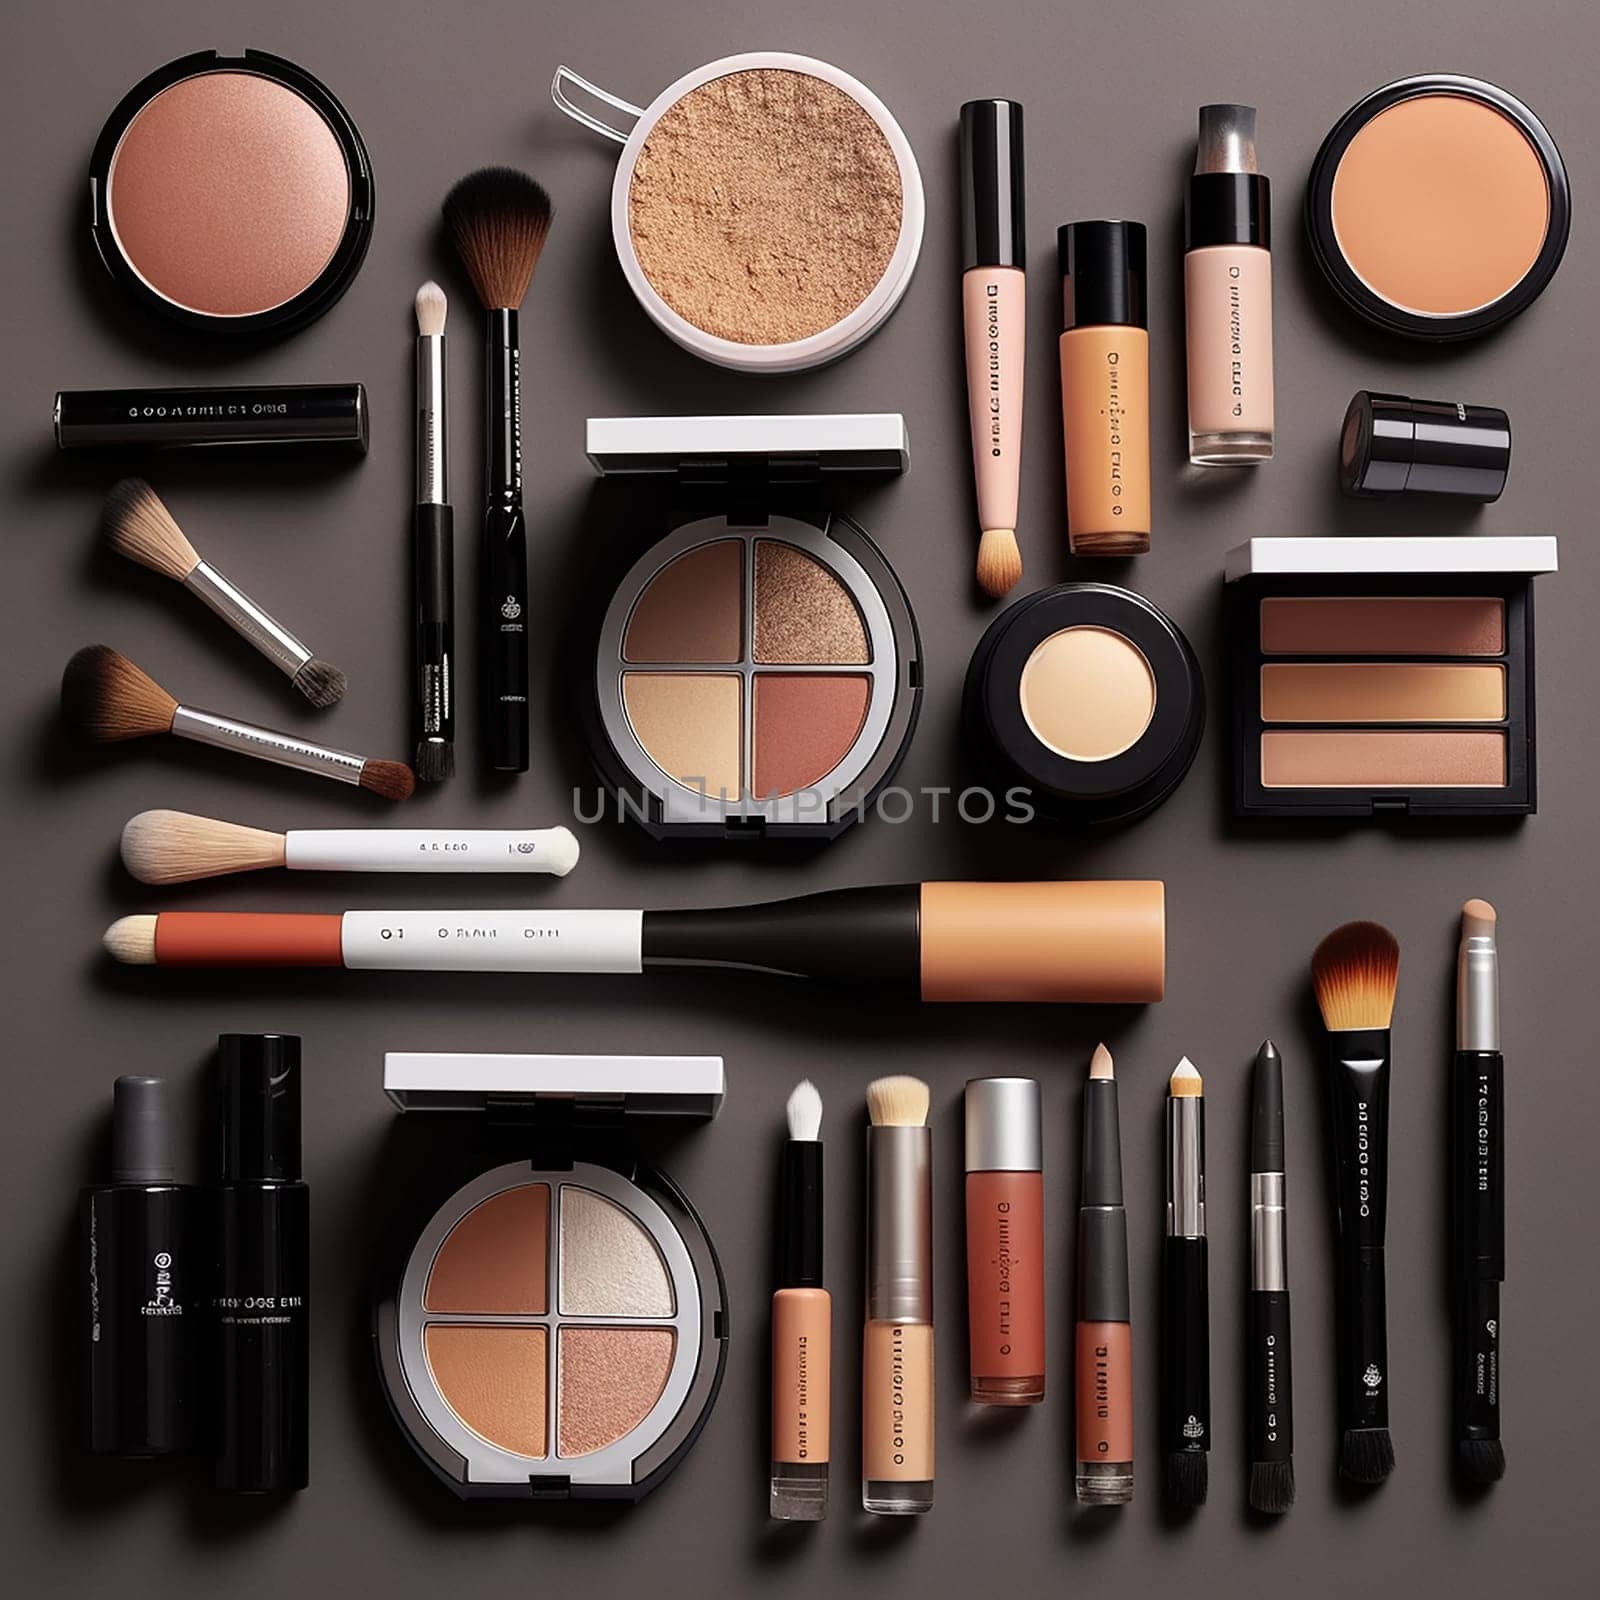 Assortment of makeup products and brushes laid out on a flat surface.